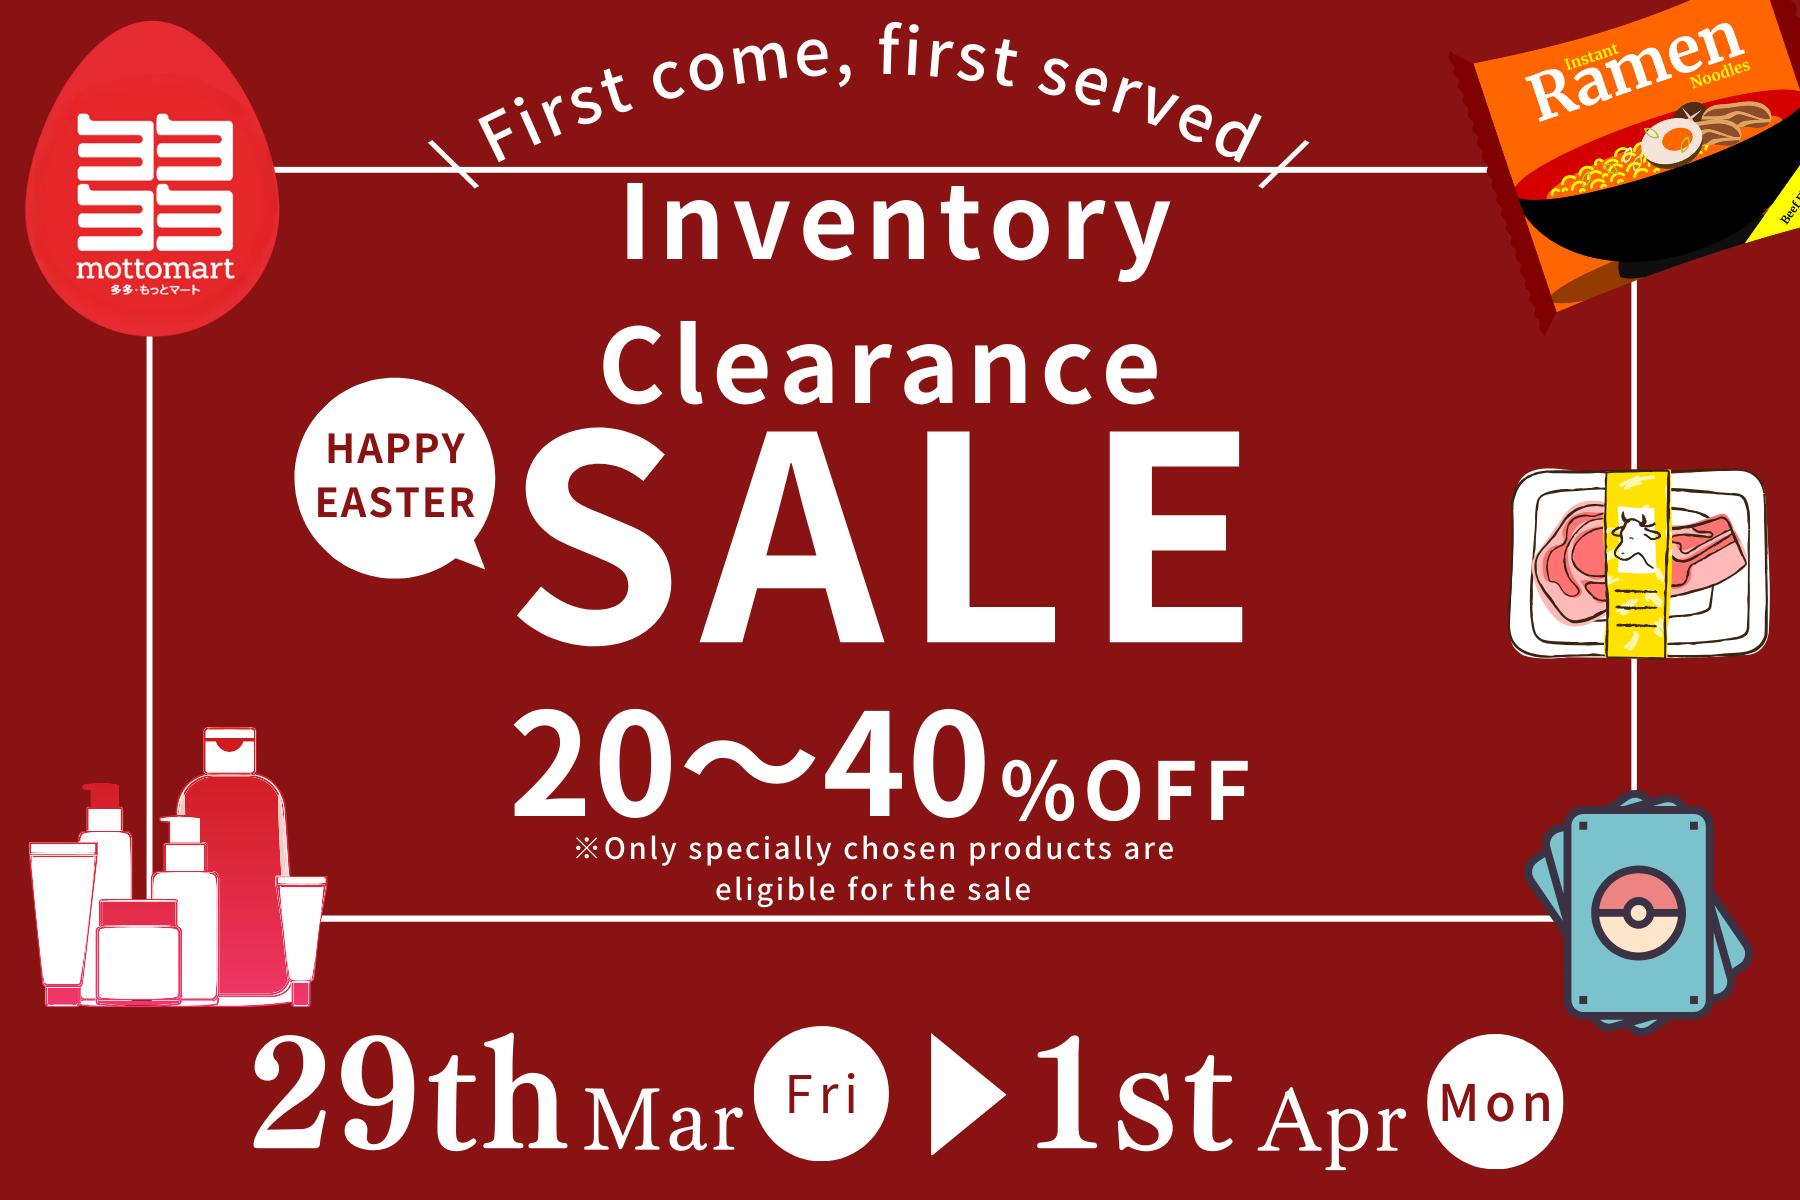 HAPPY EASTER CLEARANCE SALE – Mottomart